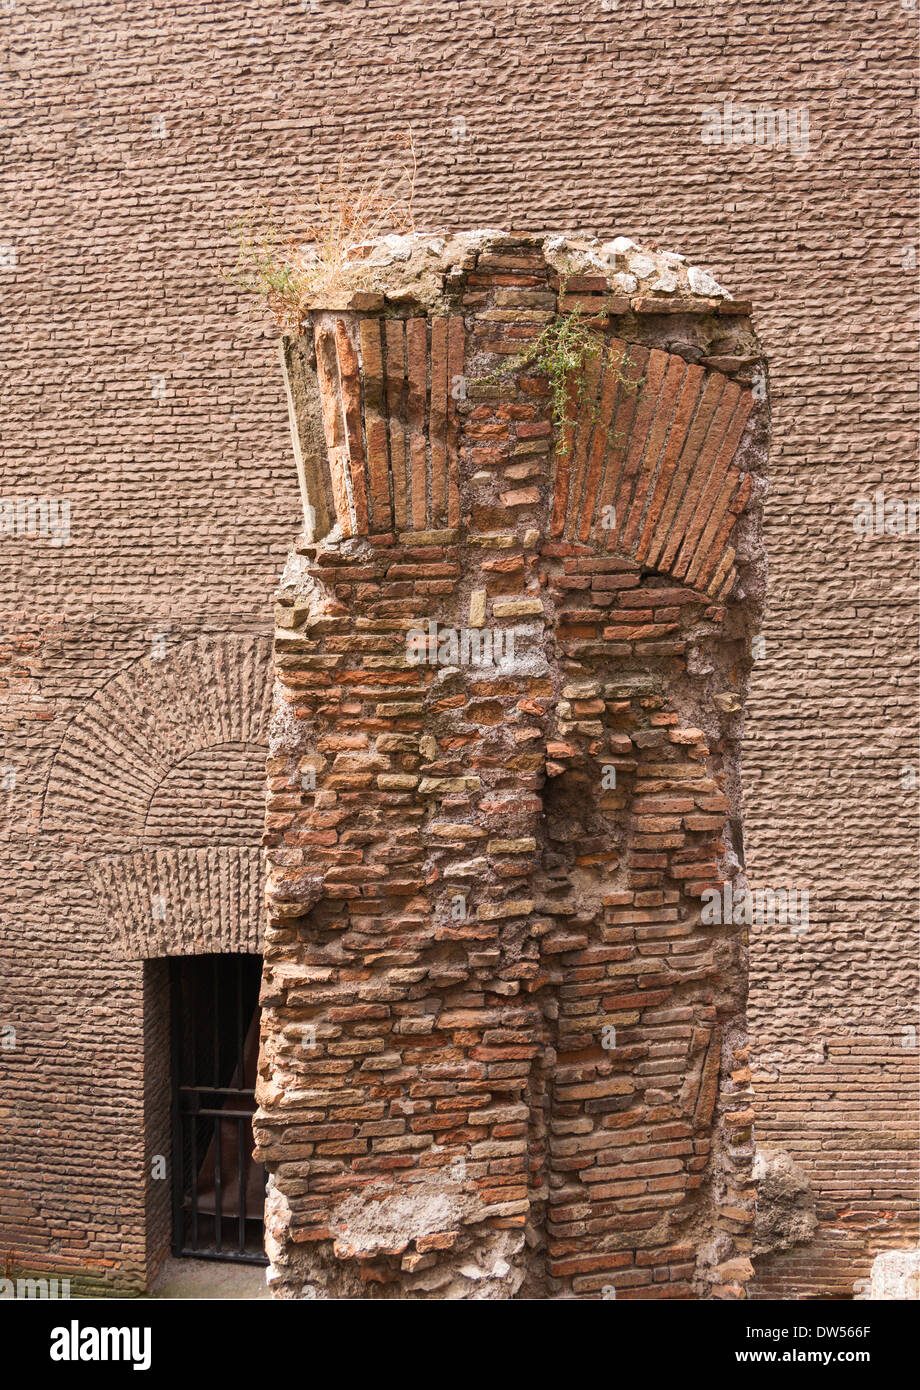 Detail of a ruined brick vault, Pantheon, Rome, Italy. Stock Photo